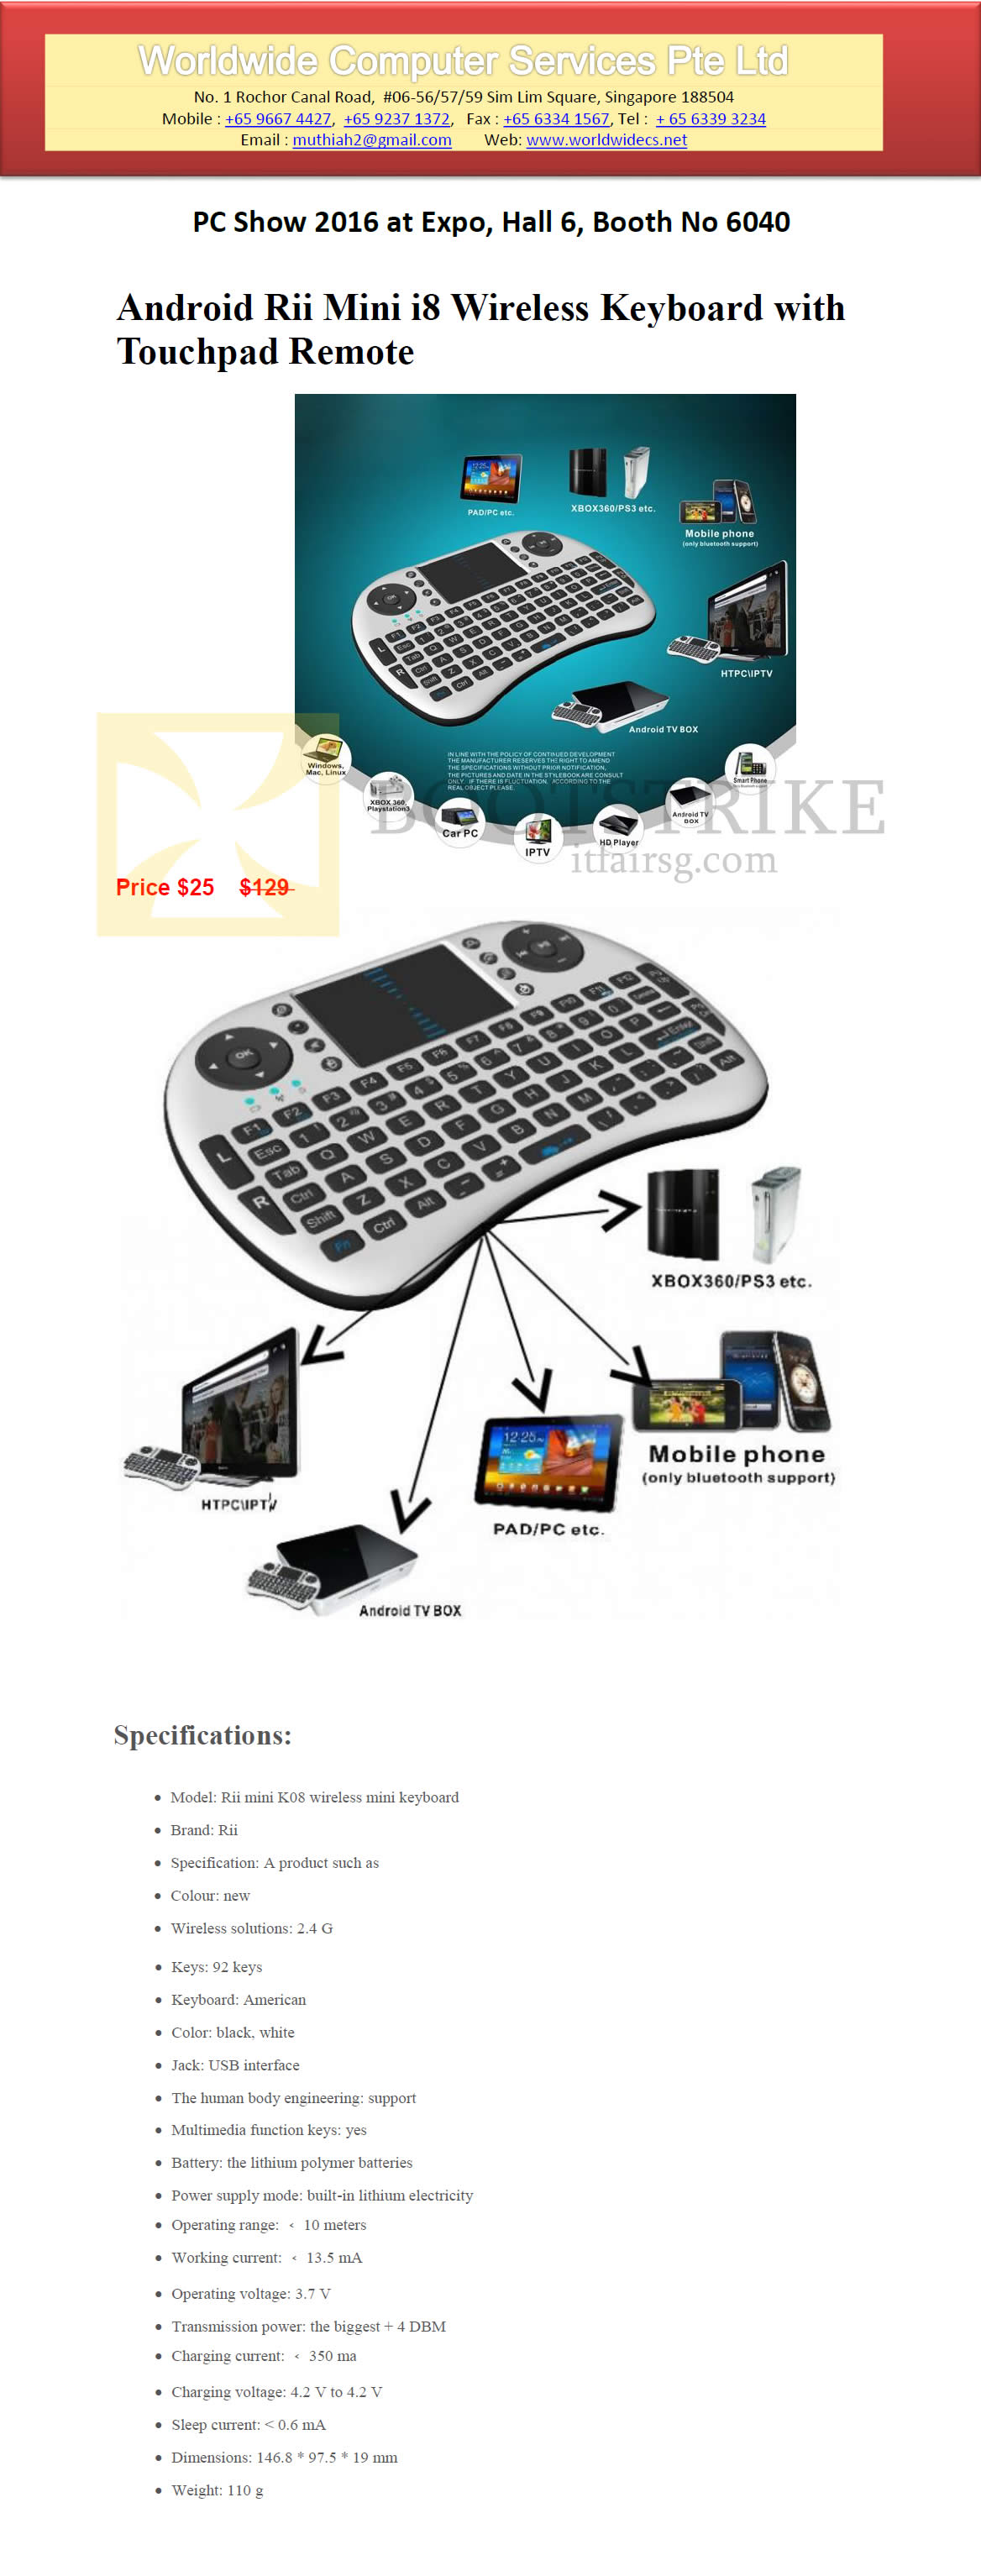 PC SHOW 2016 price list image brochure of Worldwide Computer Services Android Rii Mini I8 Wireless Mini Keyboard